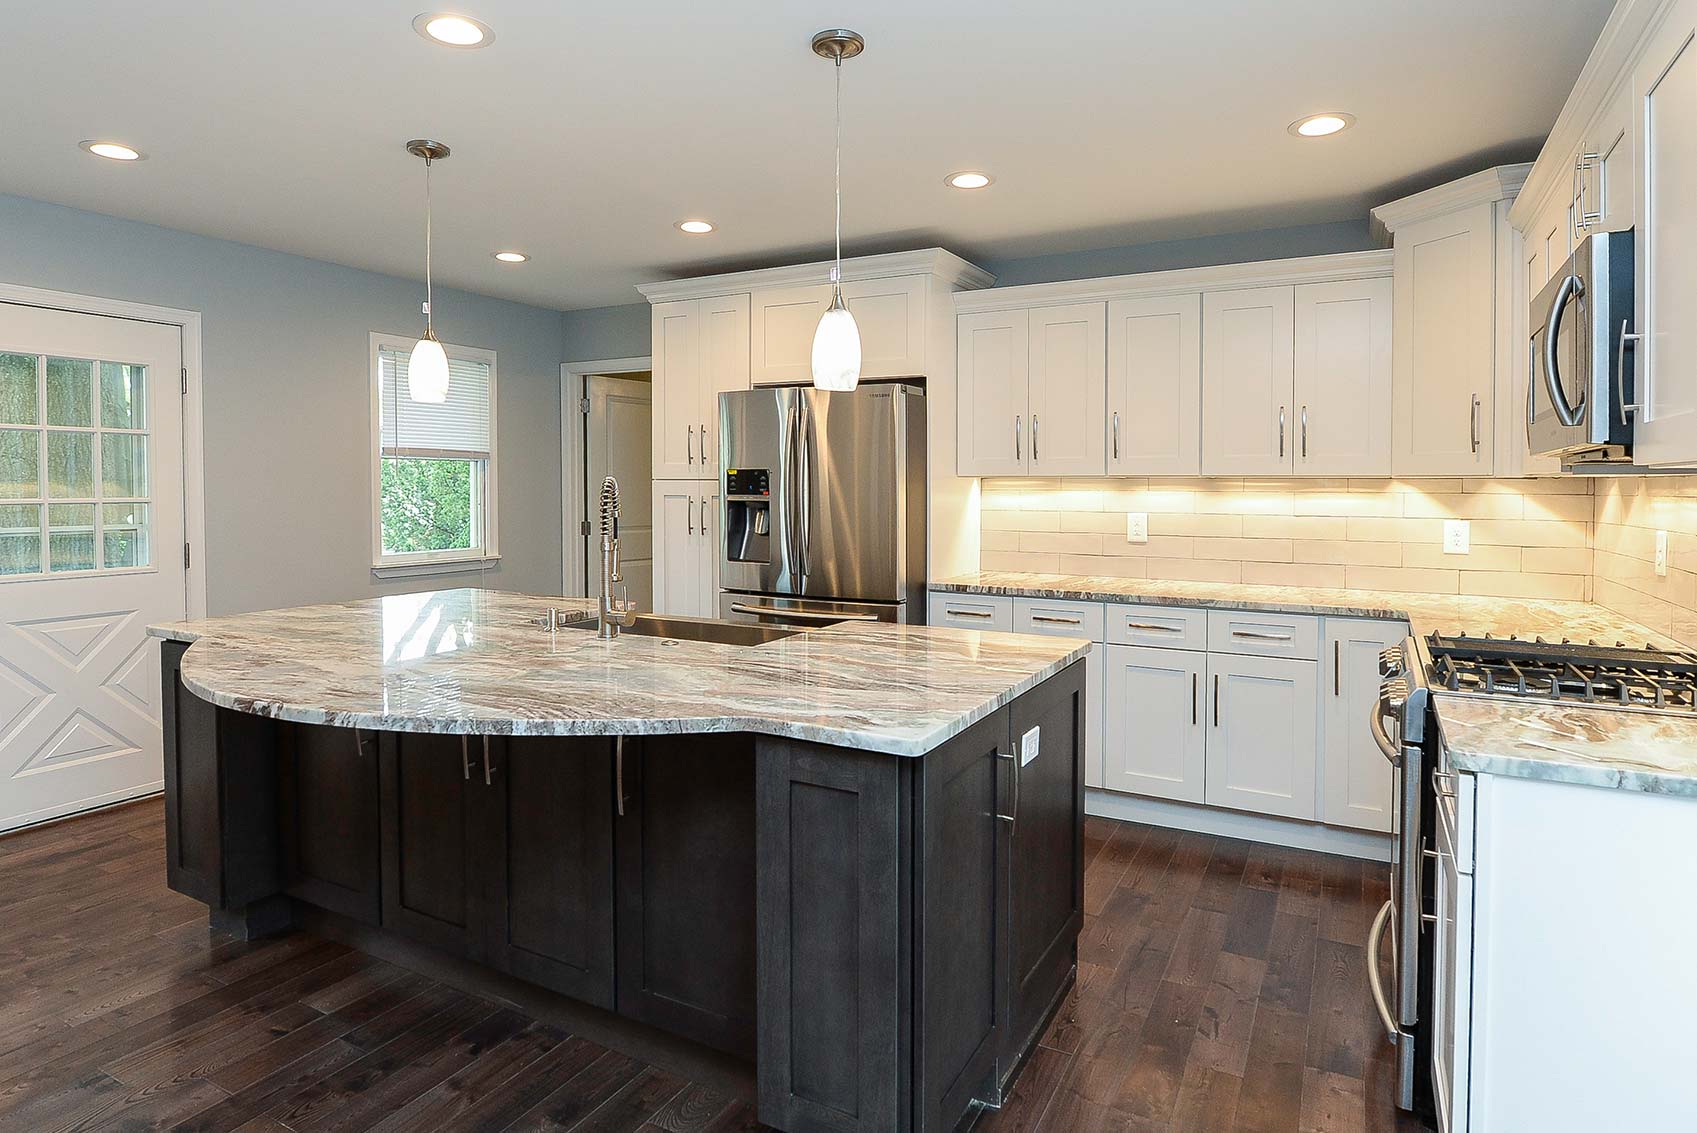 Picture of kitchen with an island and white lamps, designed by Goldleaf Designs